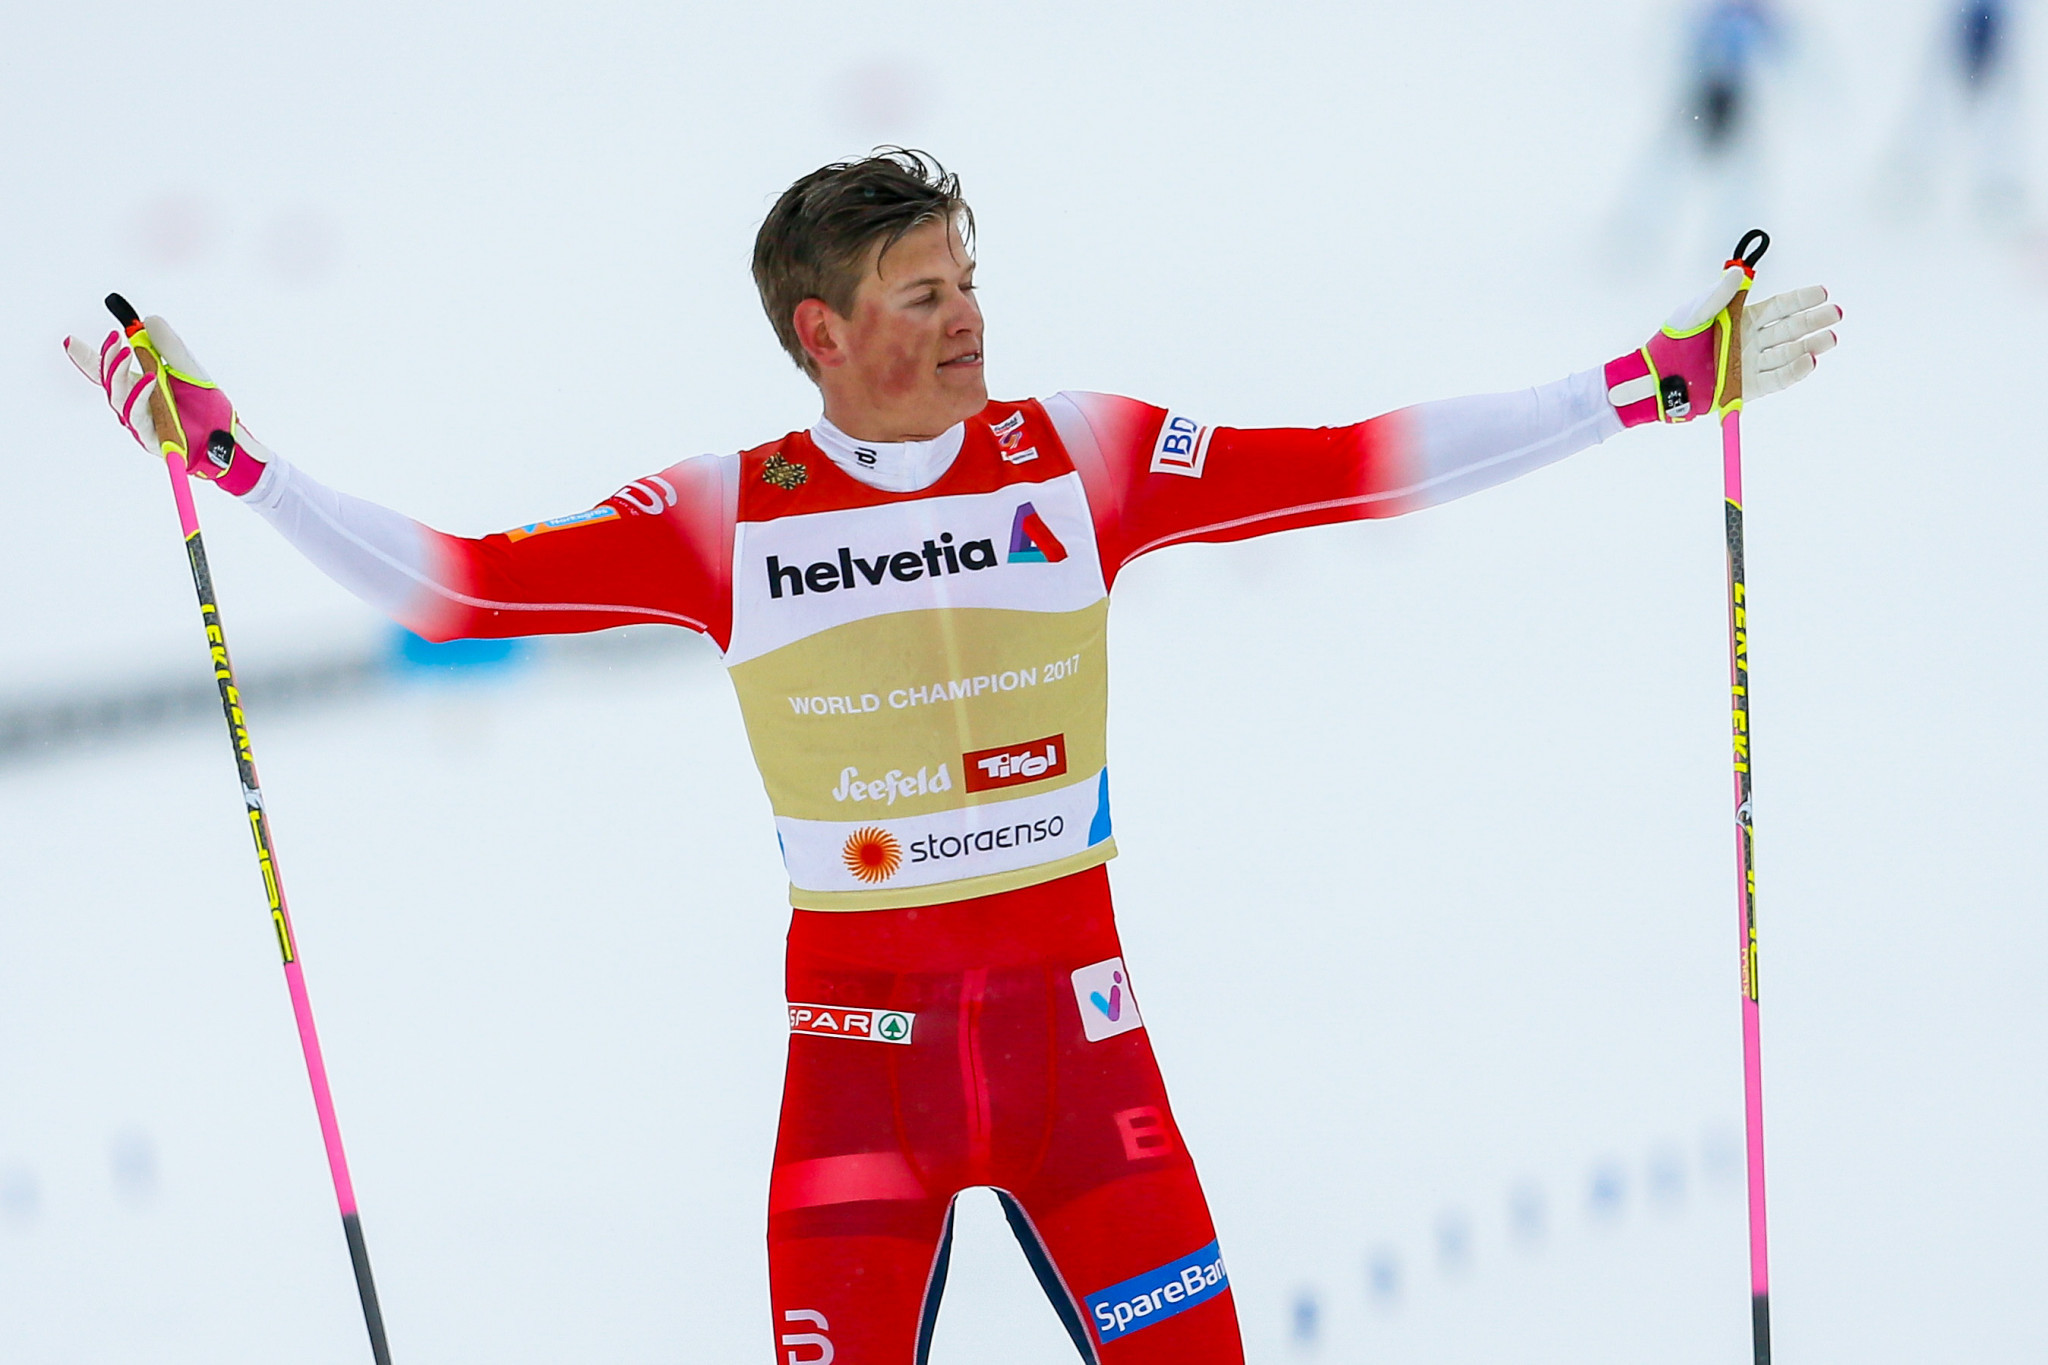 Johannes Høsflot Klæbo had the honour of leading the Norwegian team to gold ©Getty Images